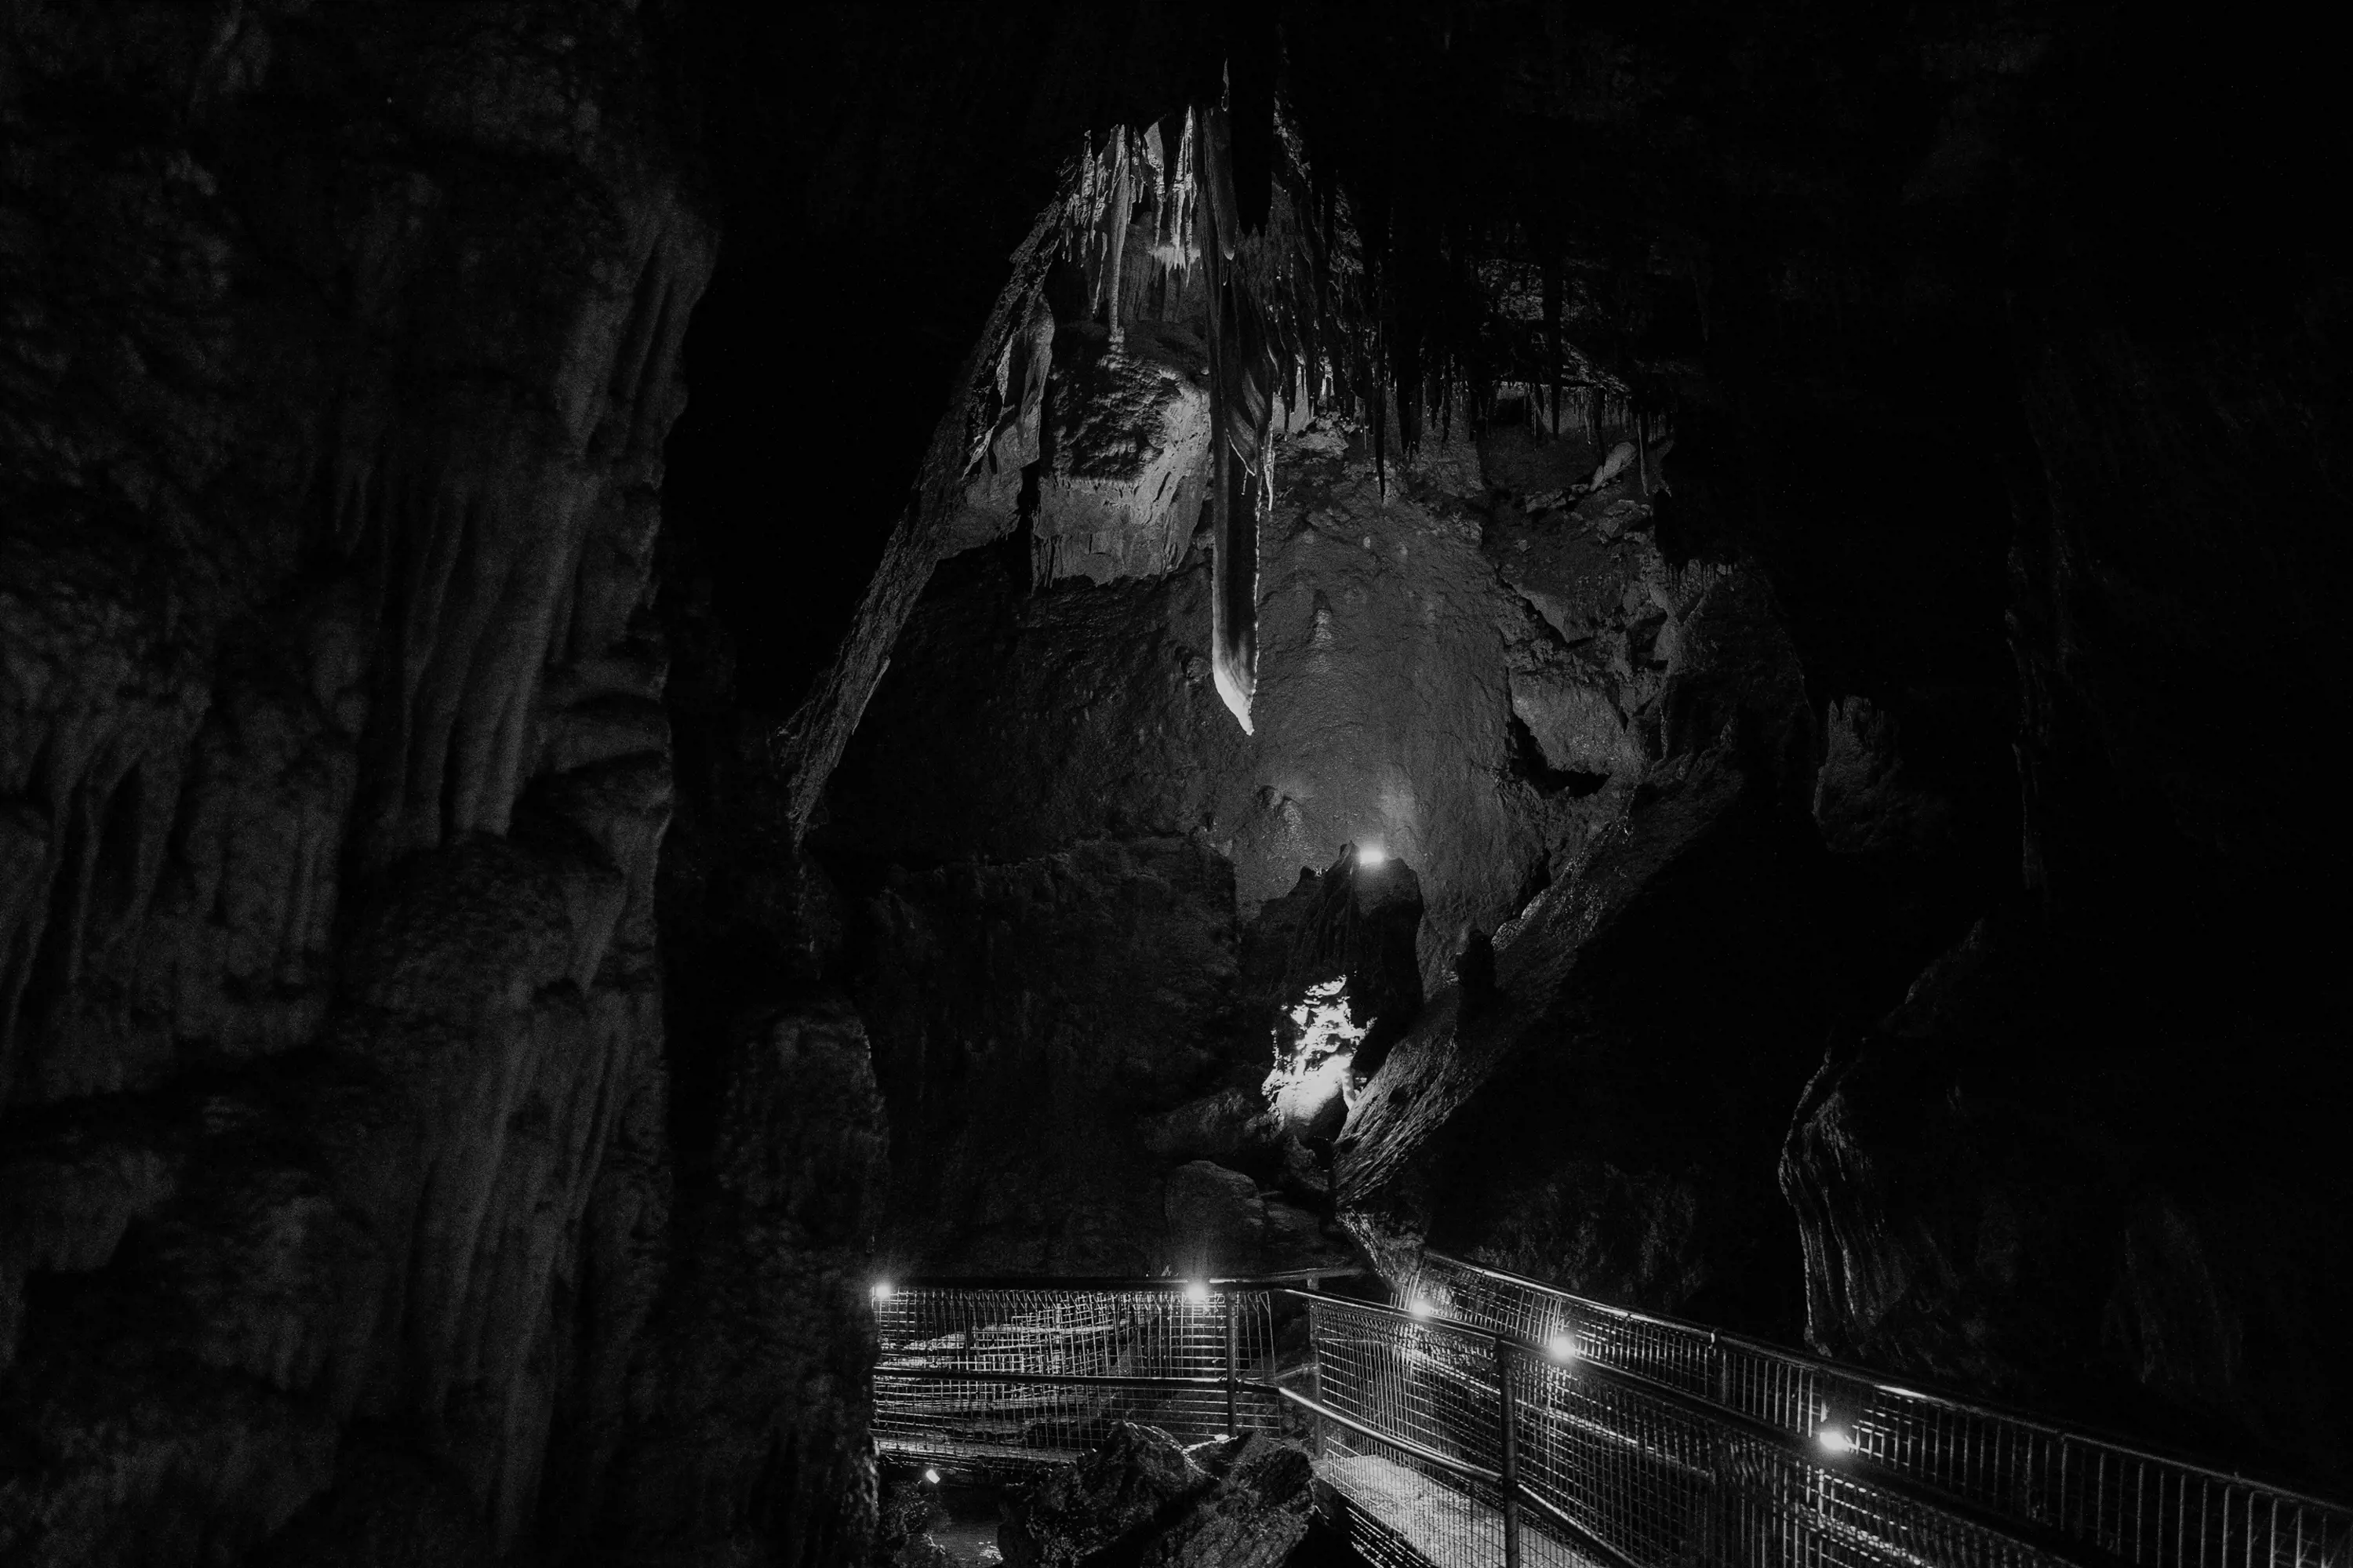 A large cave with a single stalactite suspended from the roof above a well-lit pathway.